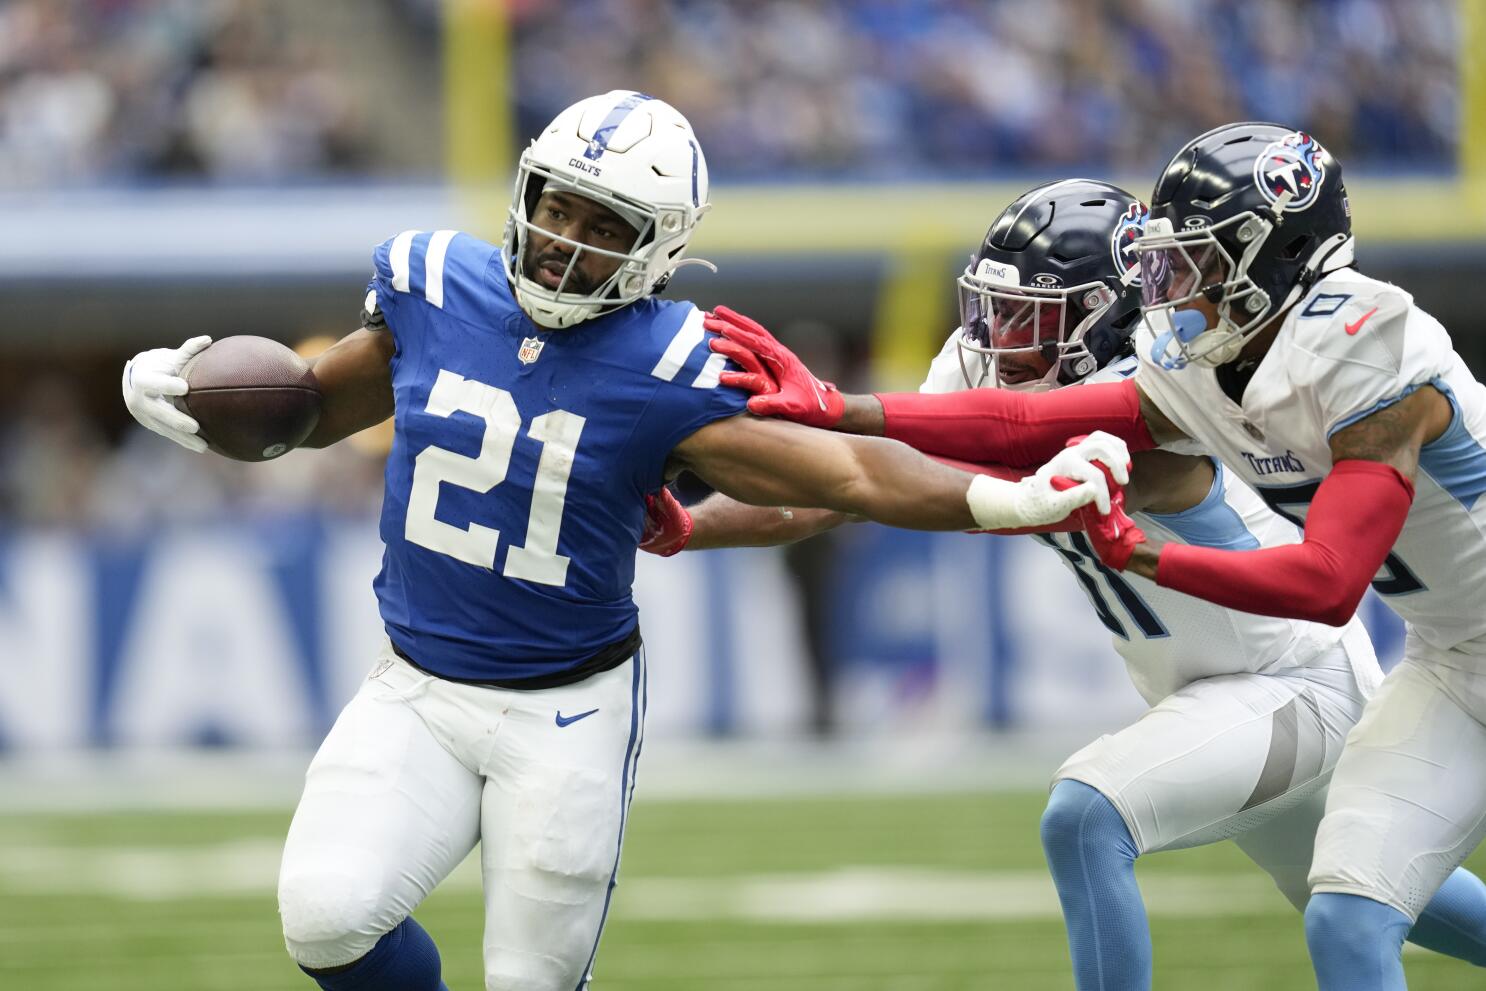 Jonathan Taylor 5 TD game video: Watch all five scores by Colts RB